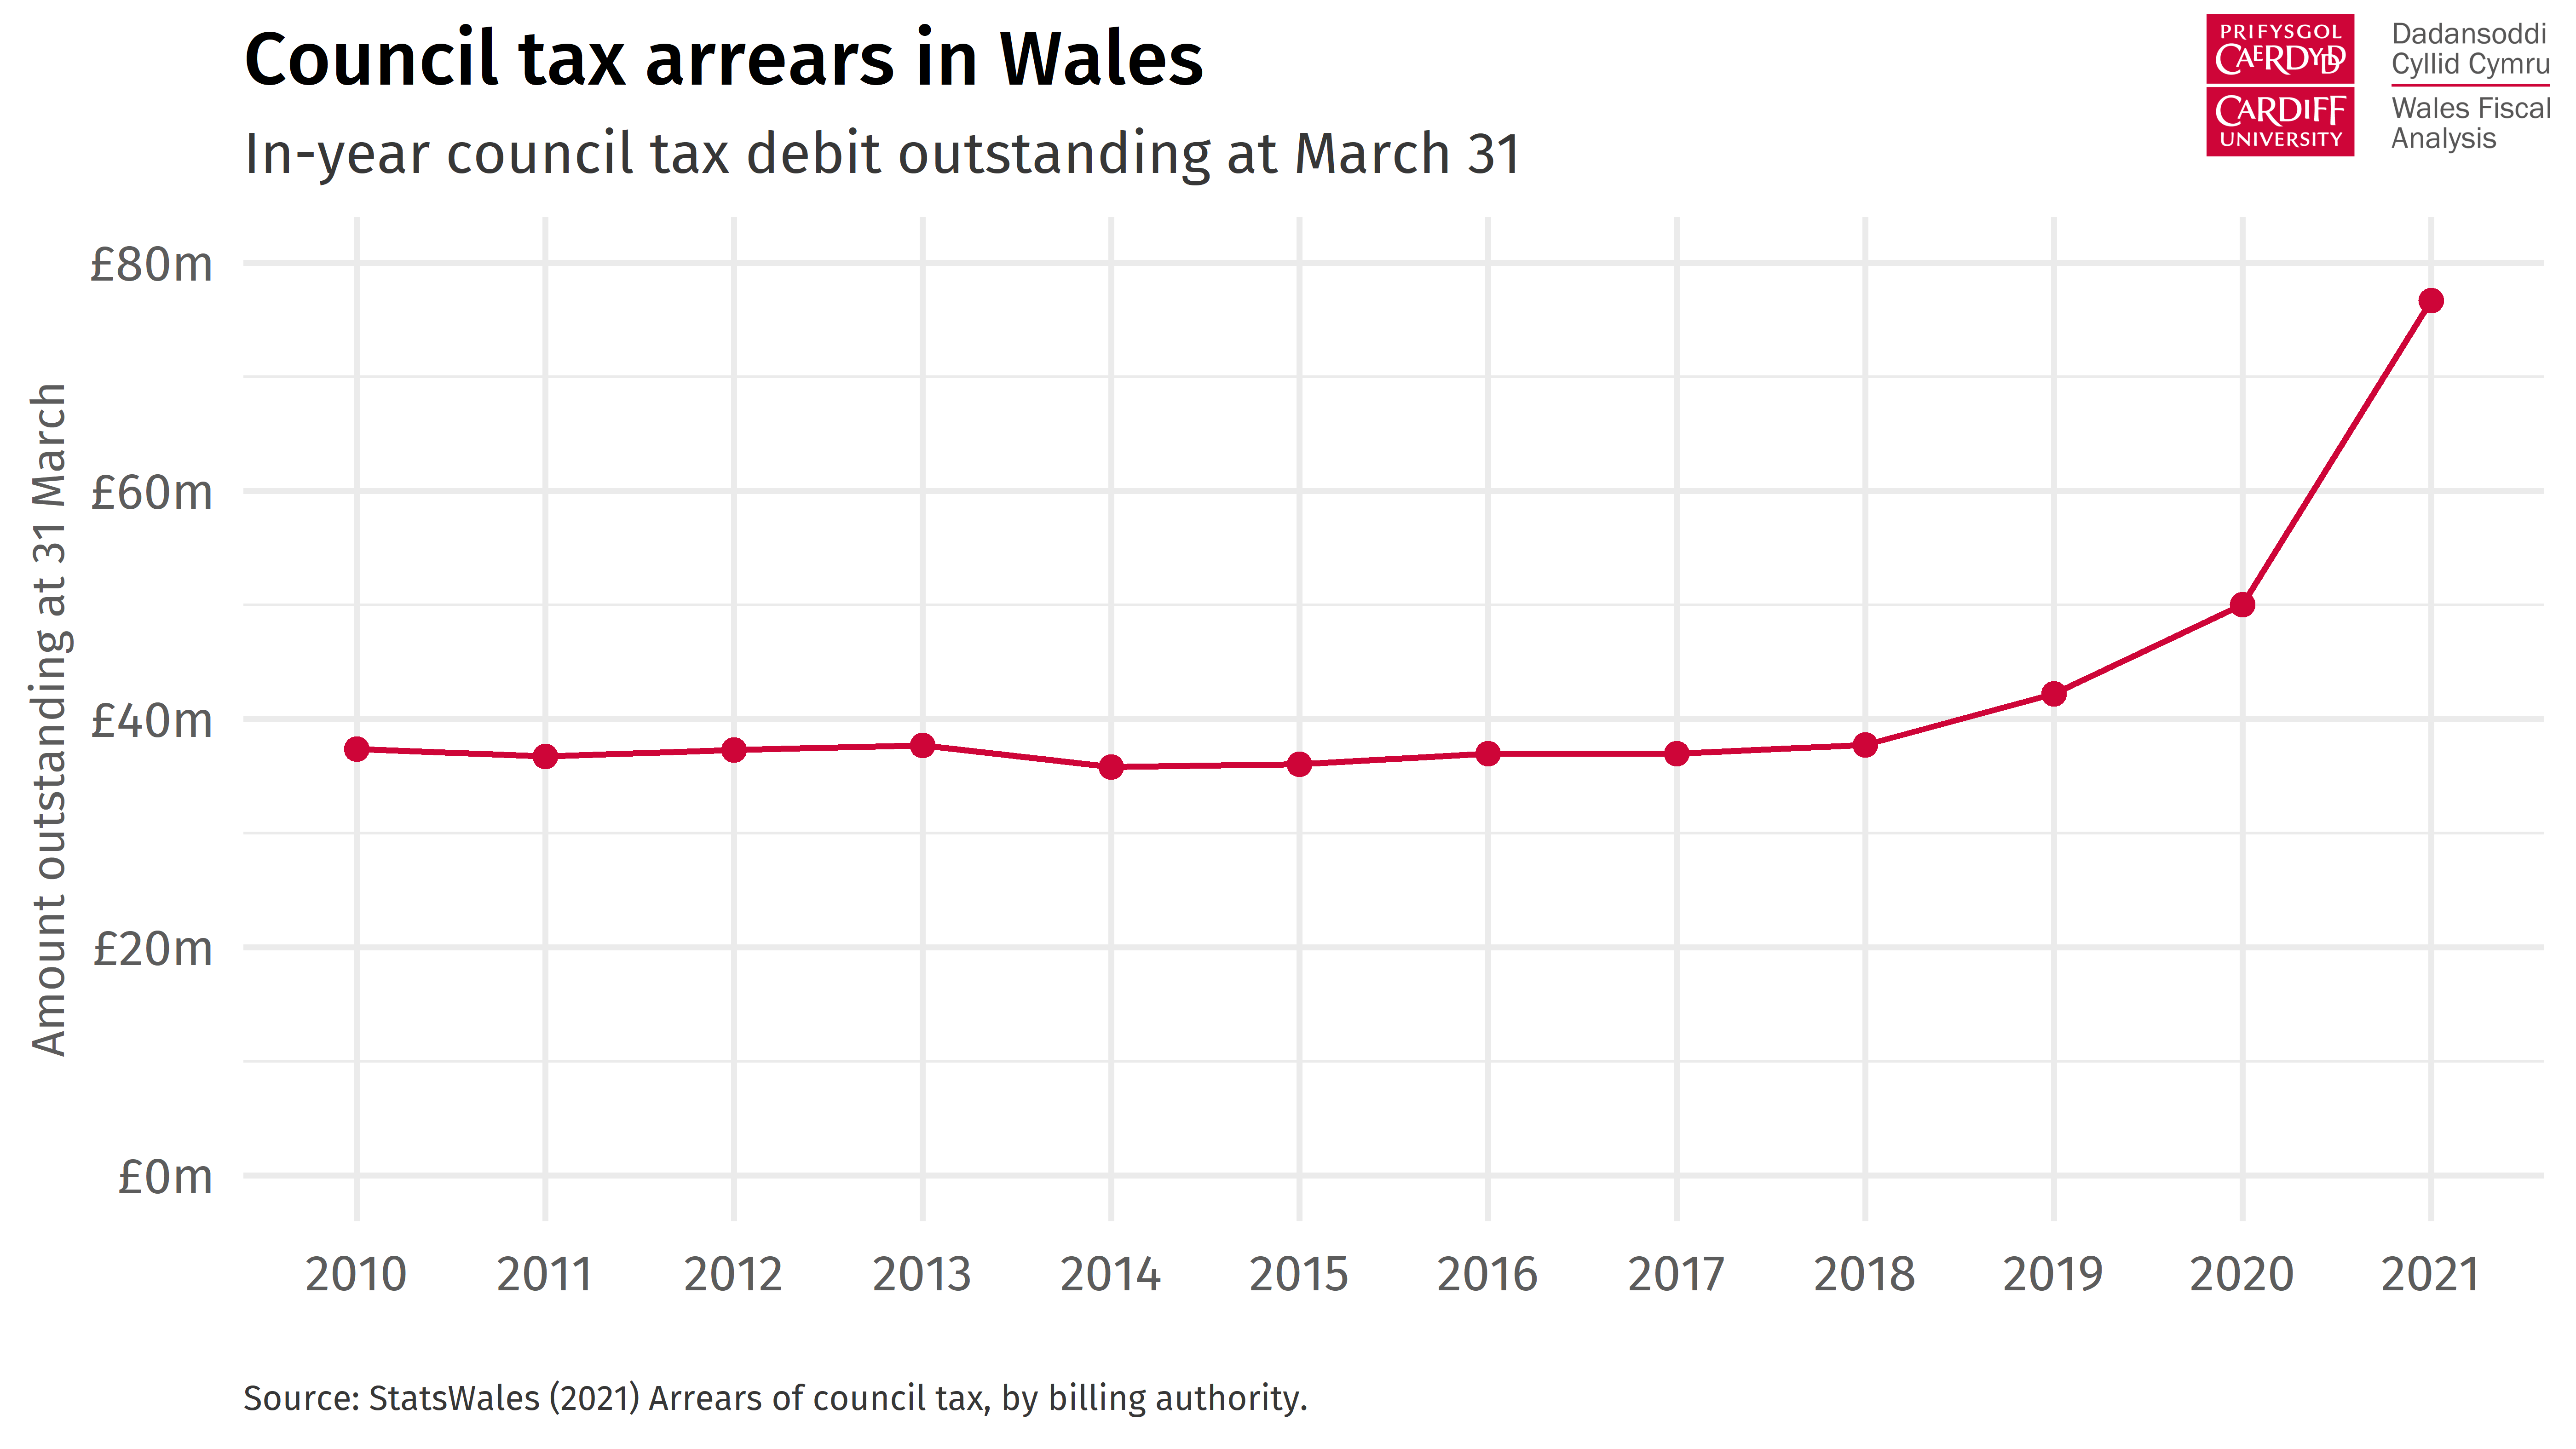 Line chart showing the rise in council tax arrears in Wales from 2010 to 2021.